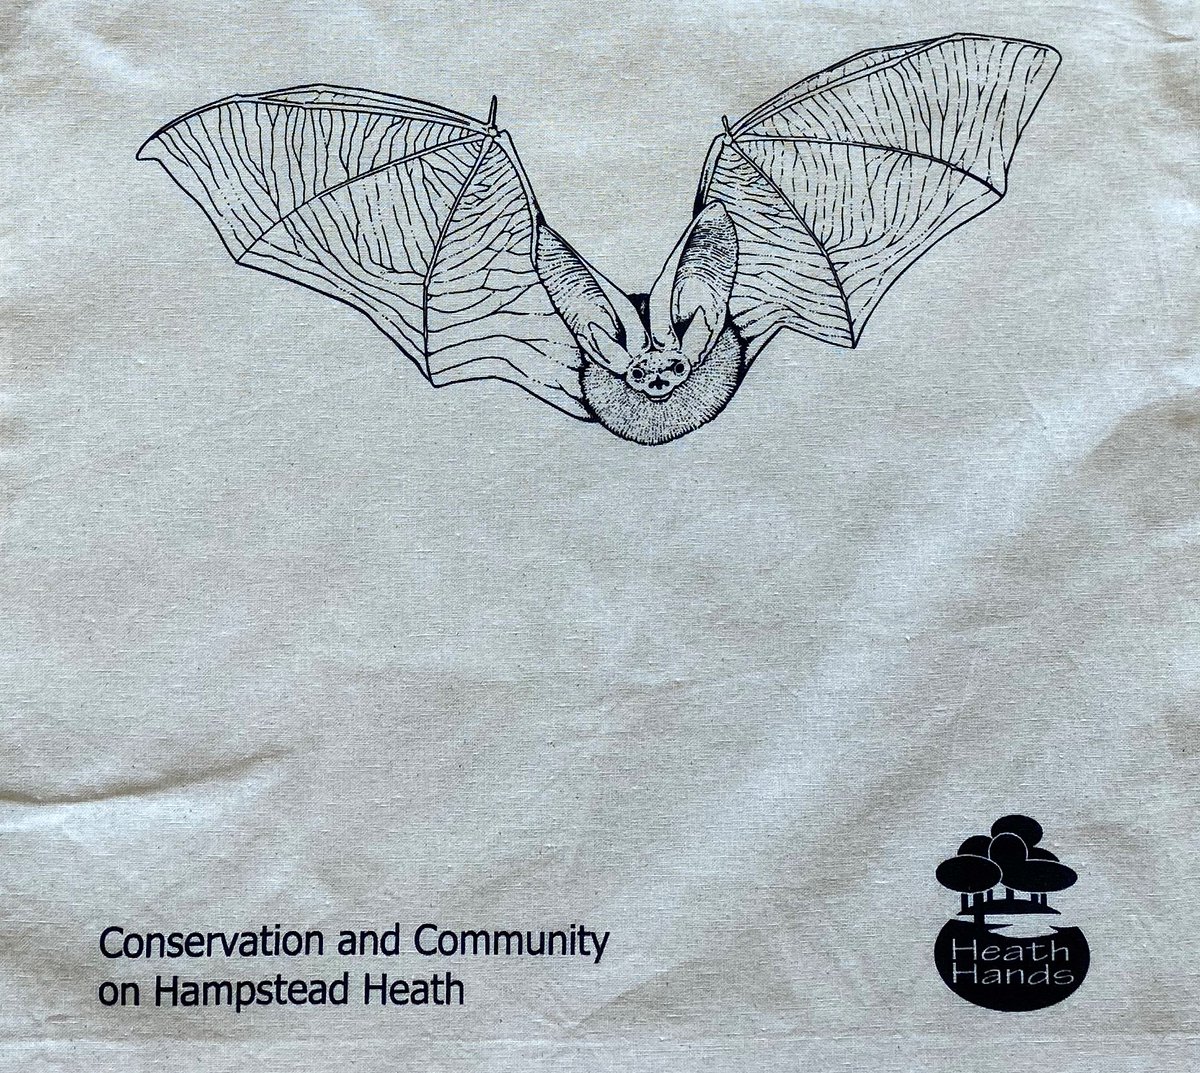 Today is #BatAppreciationDay. Why not consider helping bats on Hampstead Heath by: -Adopting a bat box: heath-hands.org.uk/wildlife-adopt…; -Or purchasing a bat wildlife bag from our shop: heath-hands.org.uk/shop Also read our most recent bat and other blogs: heath-hands.org.uk/blog/hampstead…